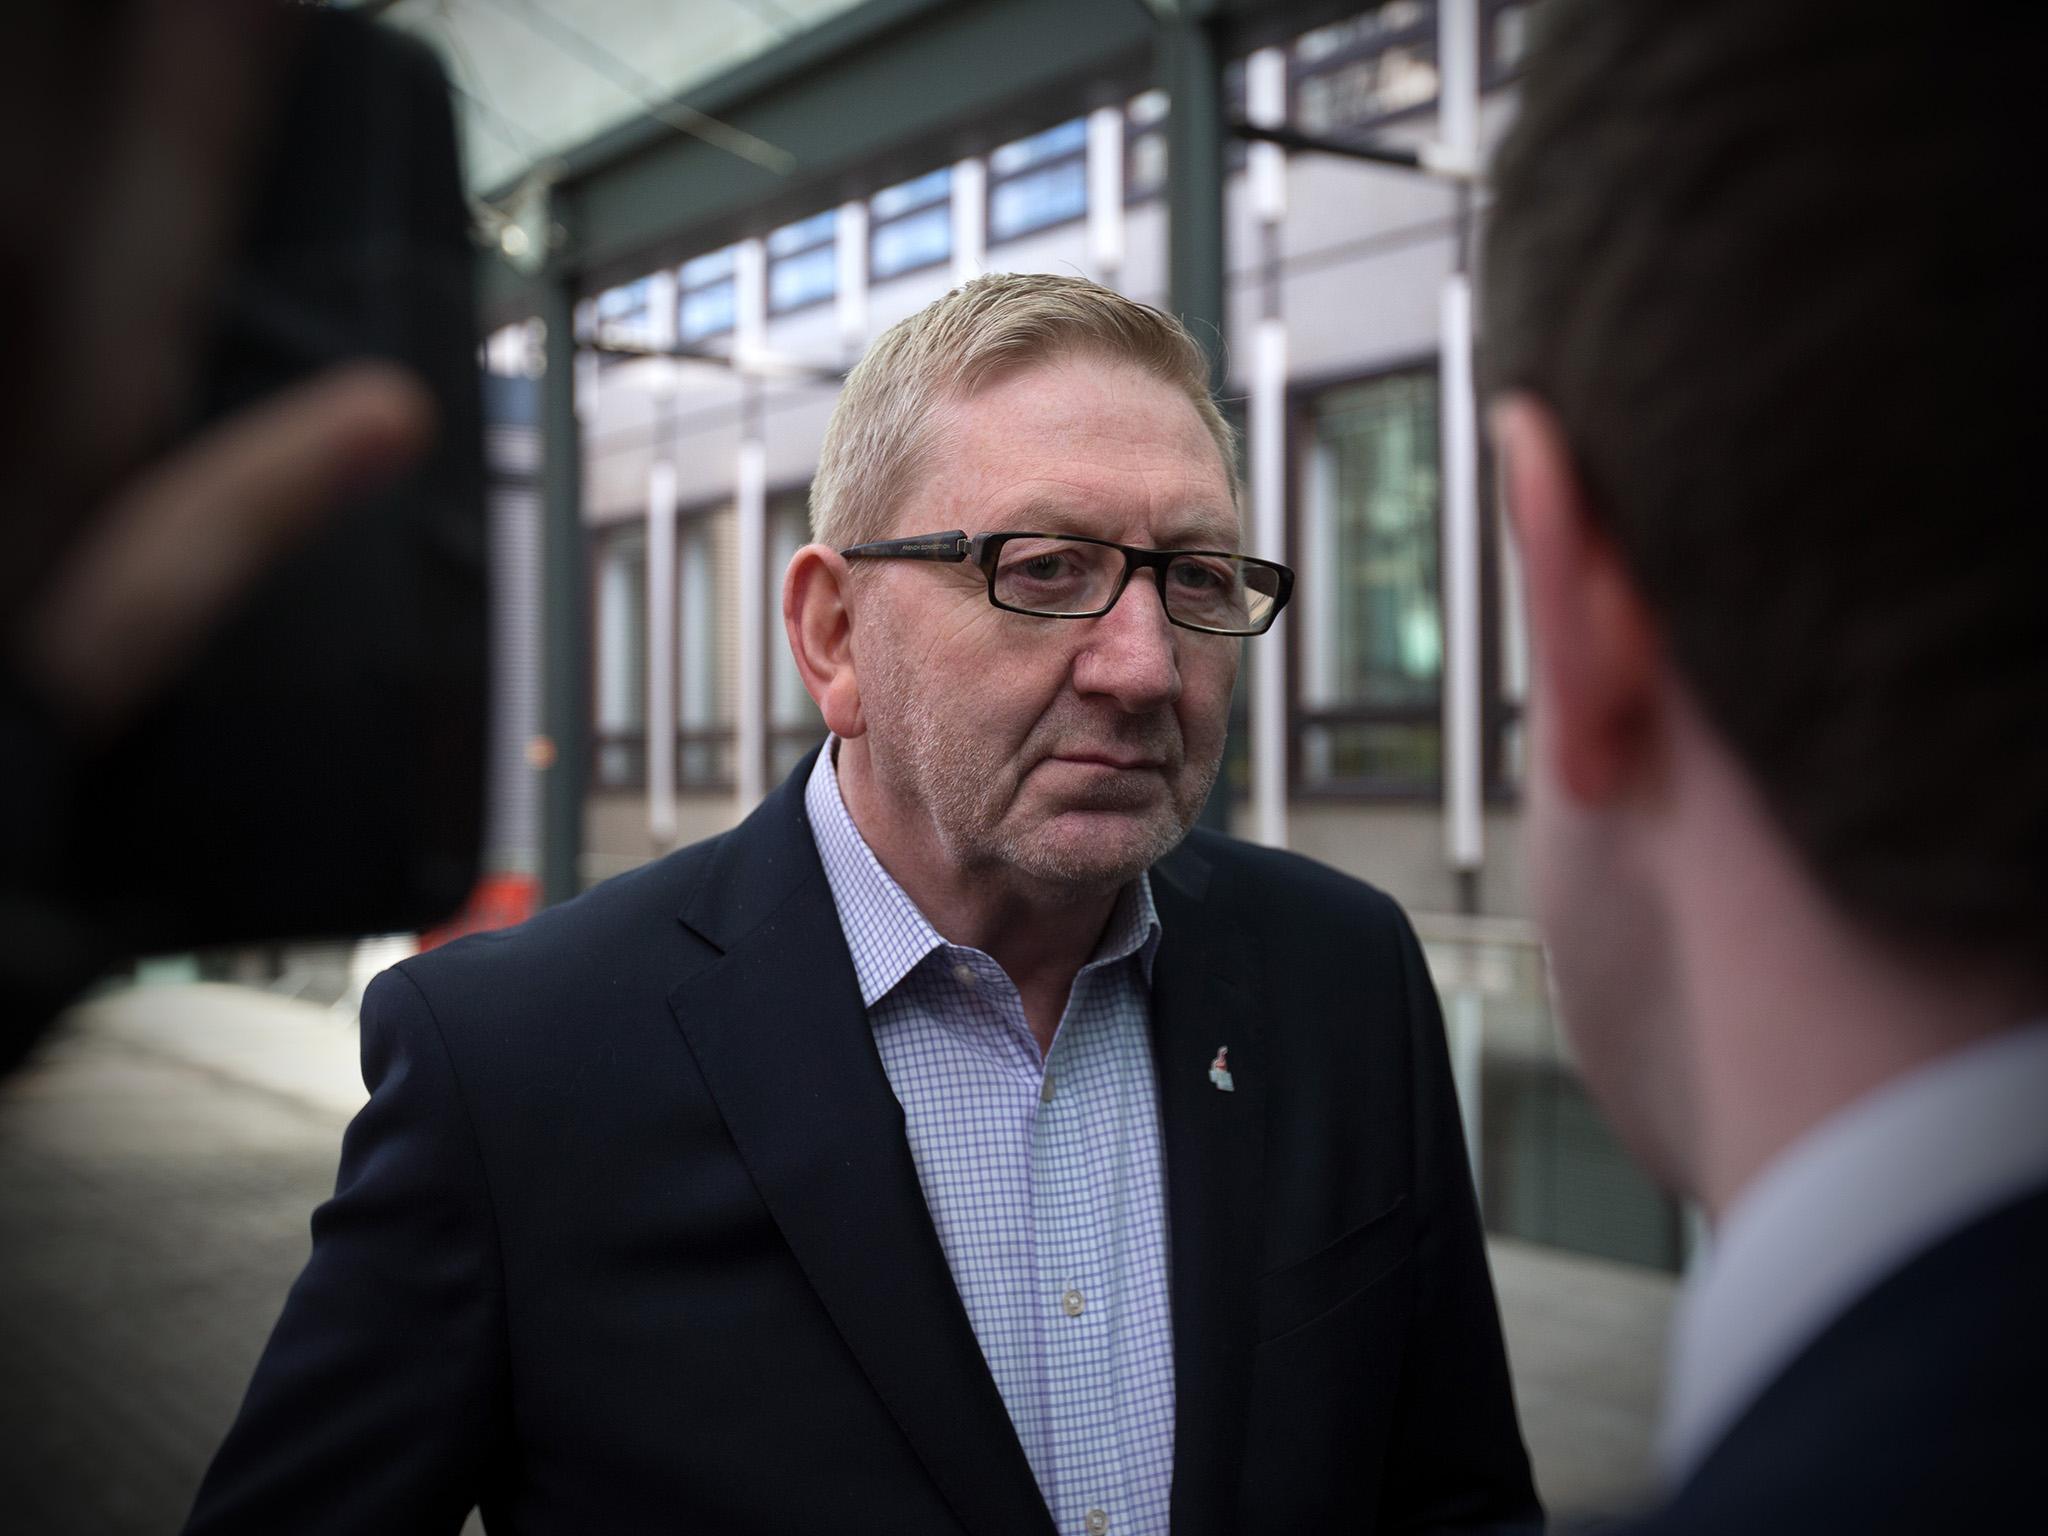 Len McCluskey, leader of Unite, says MI5 may have been discrediting Jeremy Corbyn